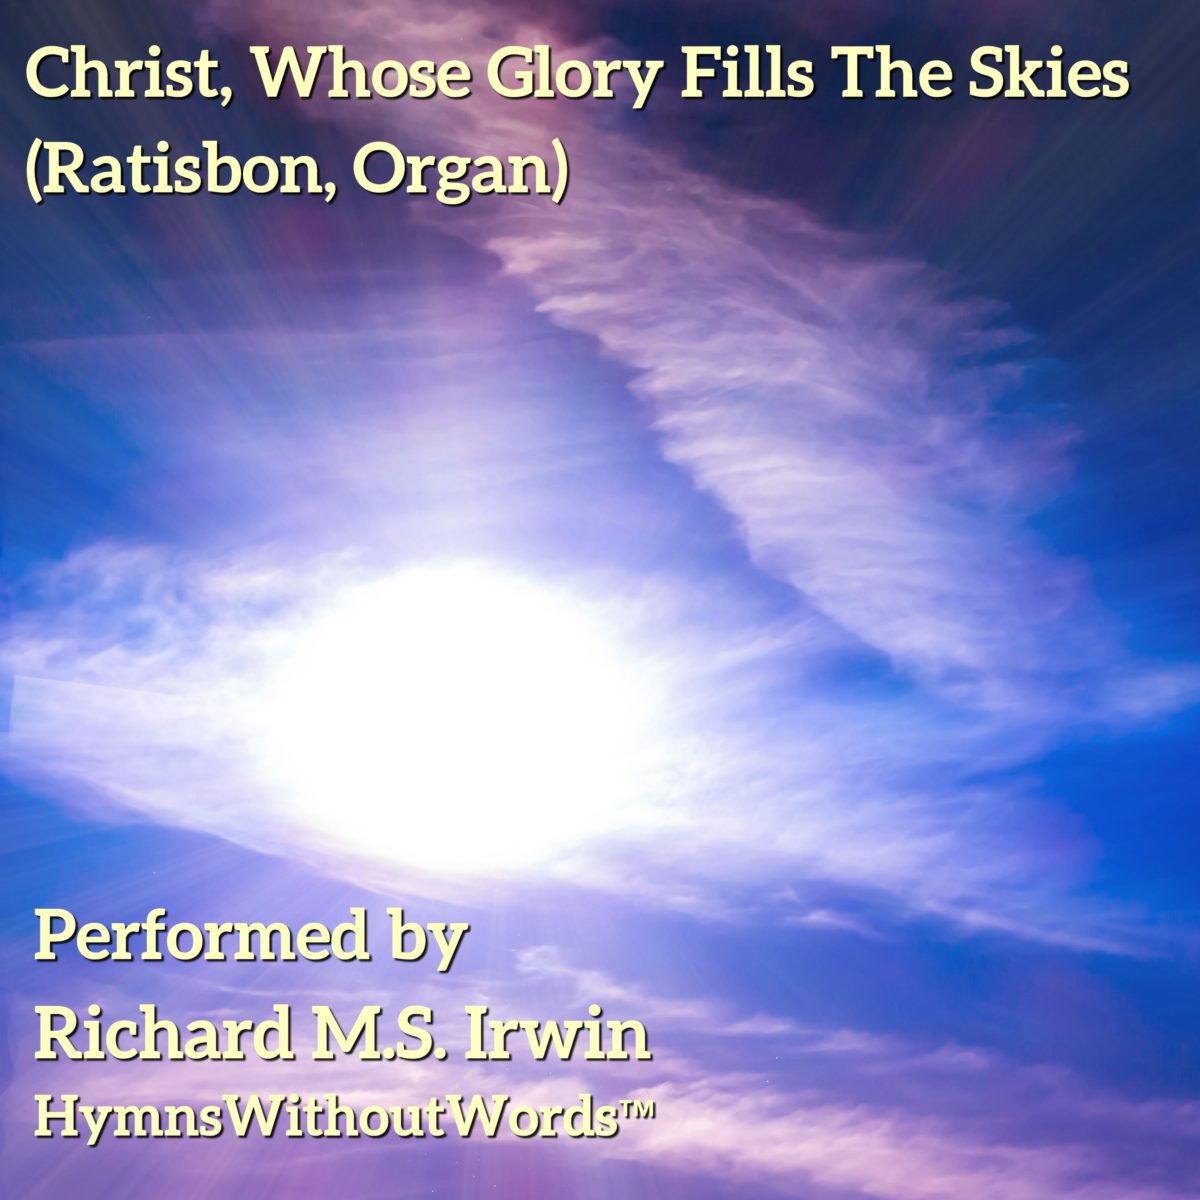 Christ Whose Glory Fills The Skies